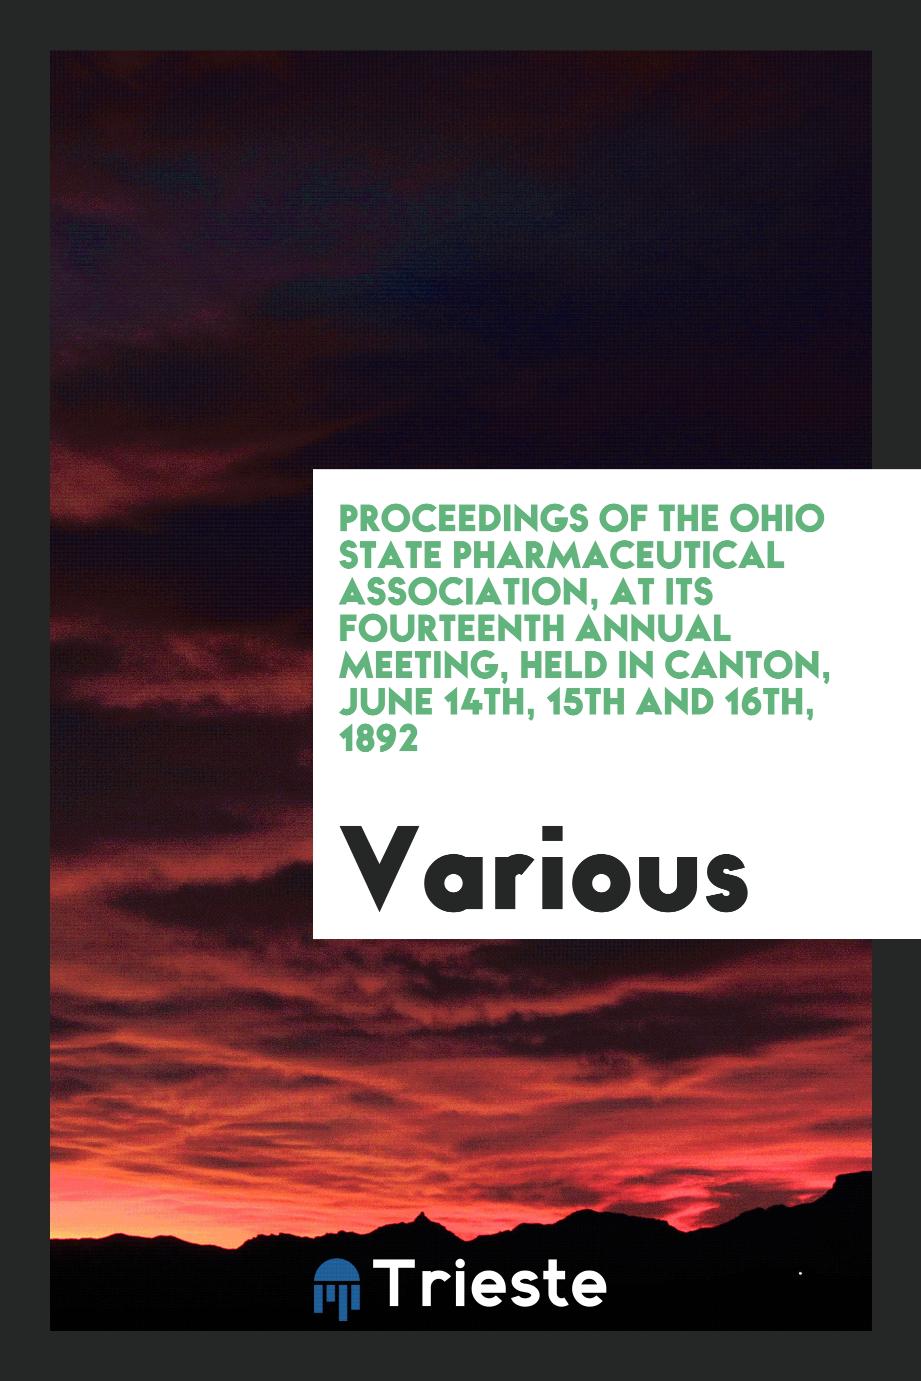 Proceedings of the Ohio State Pharmaceutical Association, at Its Fourteenth Annual Meeting, Held in Canton, June 14th, 15th and 16th, 1892